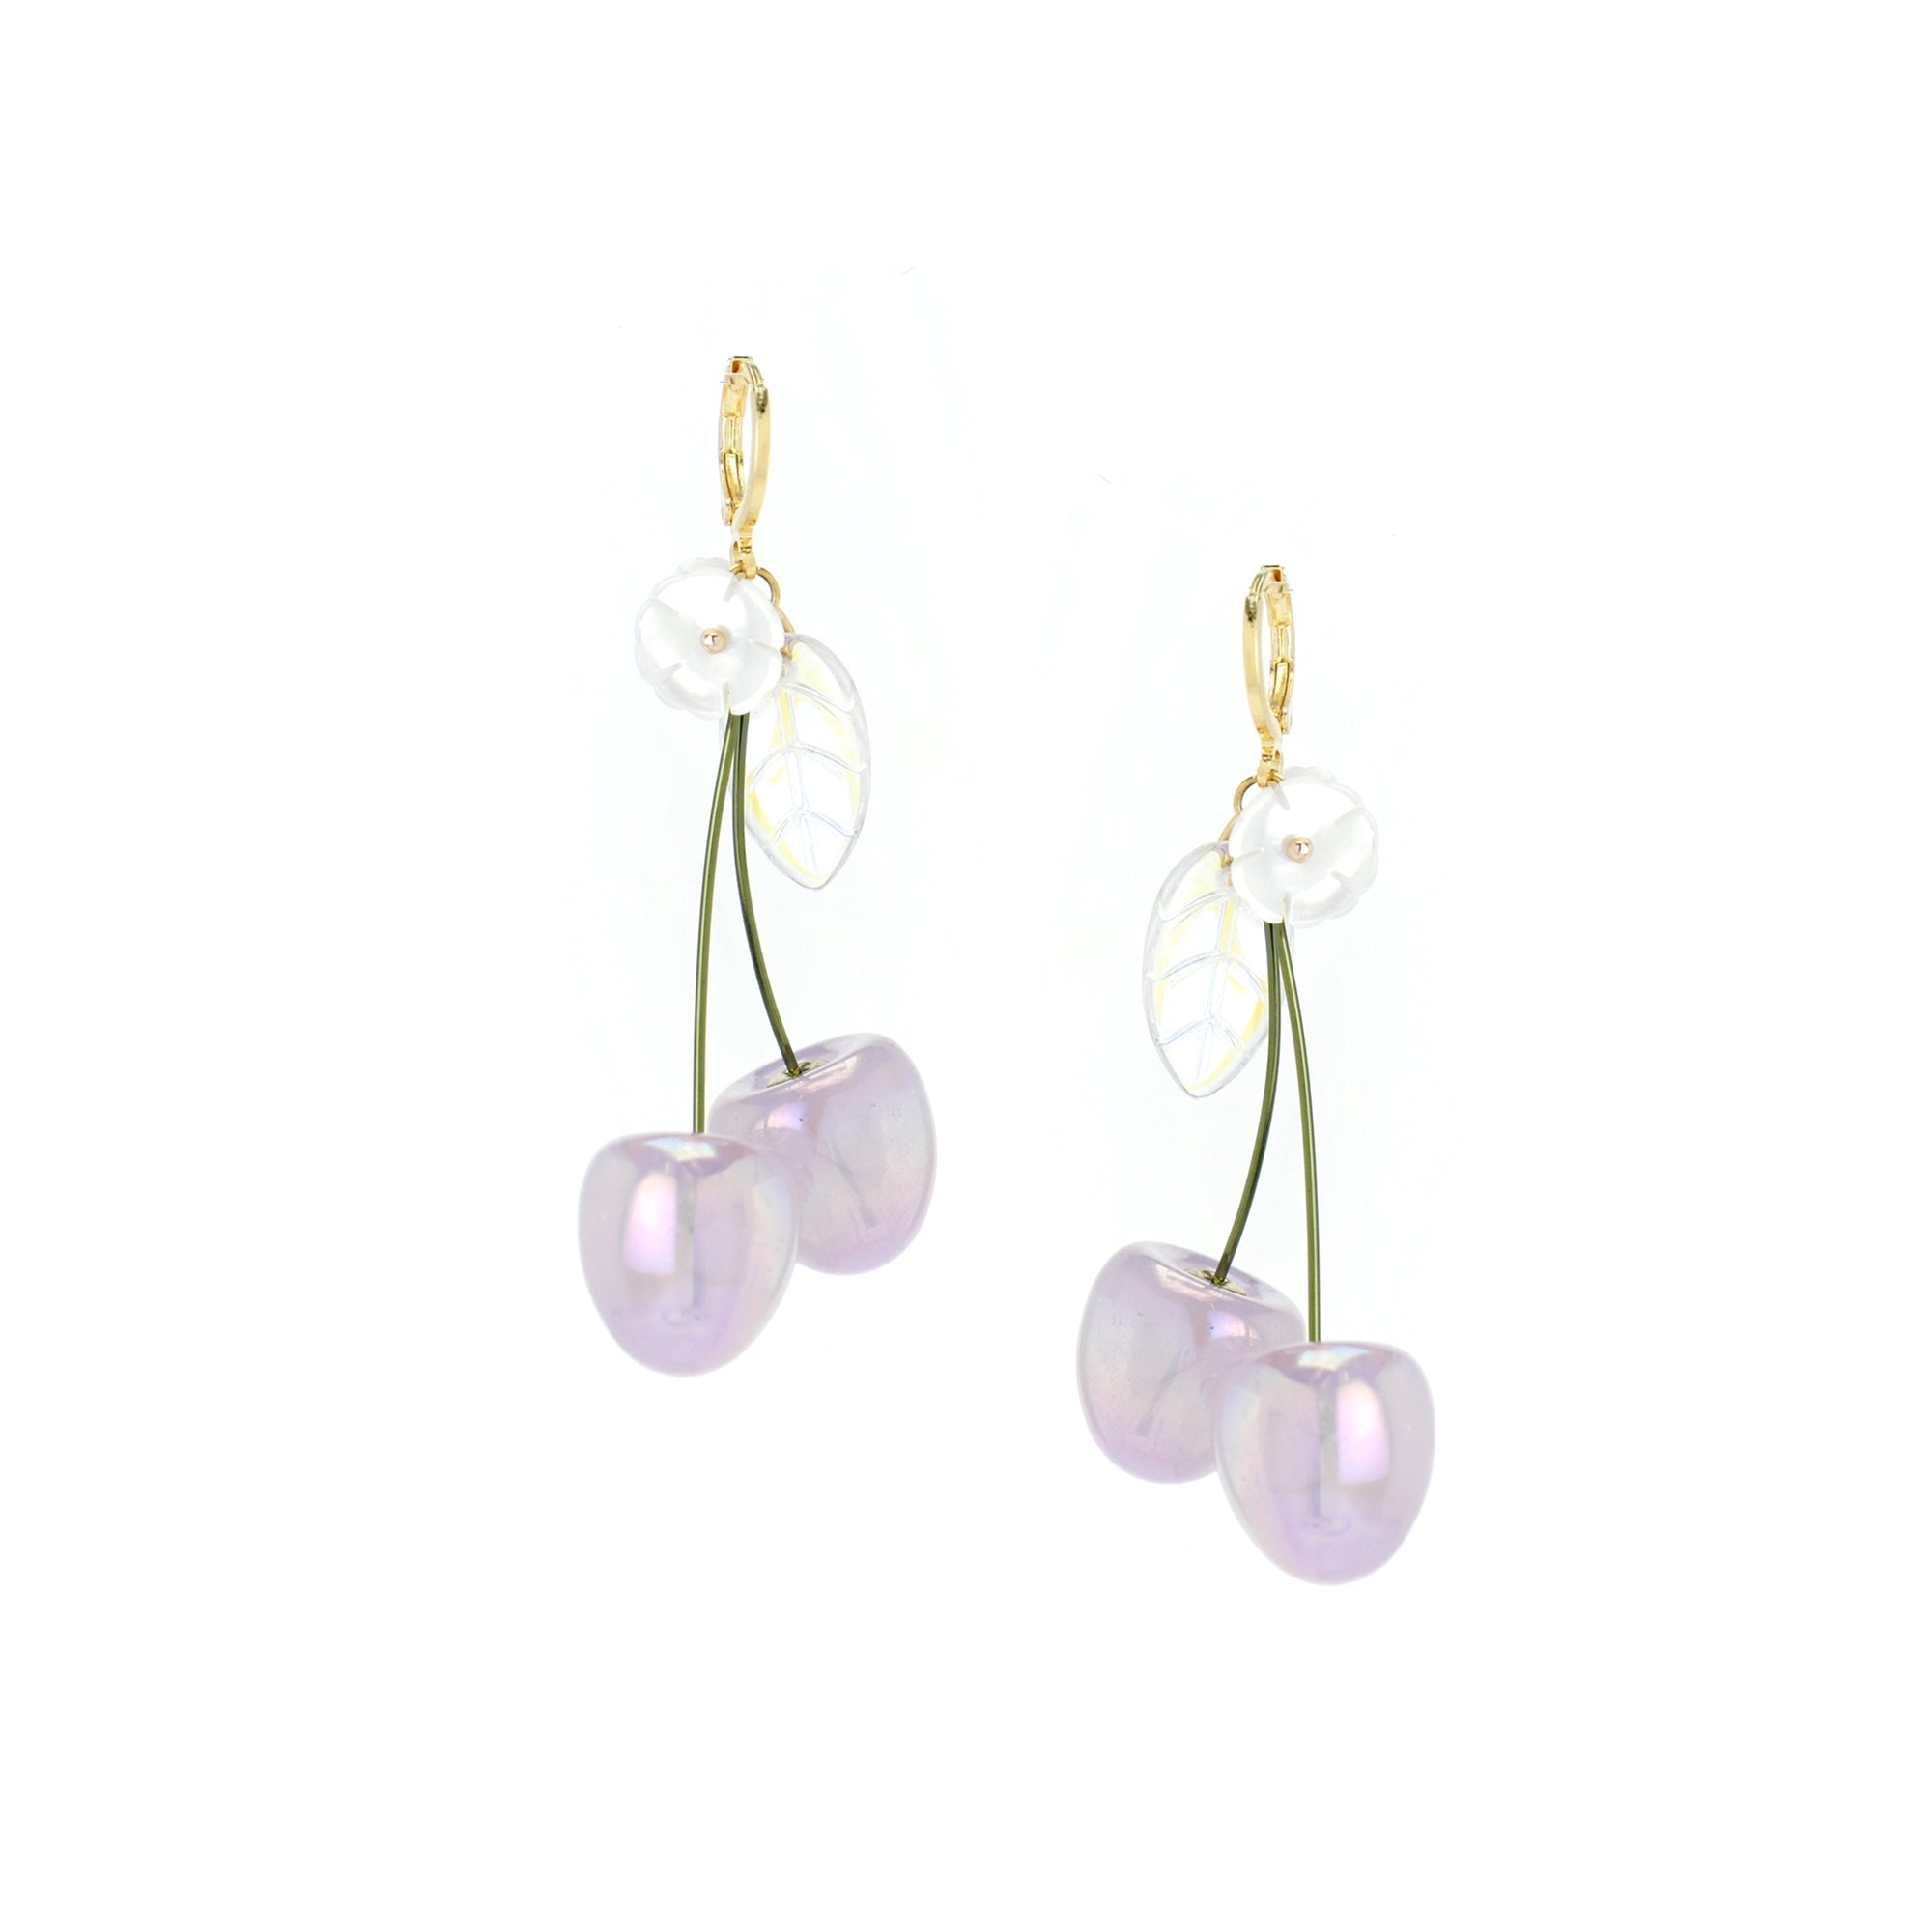 Double Cherry Drop Earrings with Mother of Pearl Flower and Glass Leaf